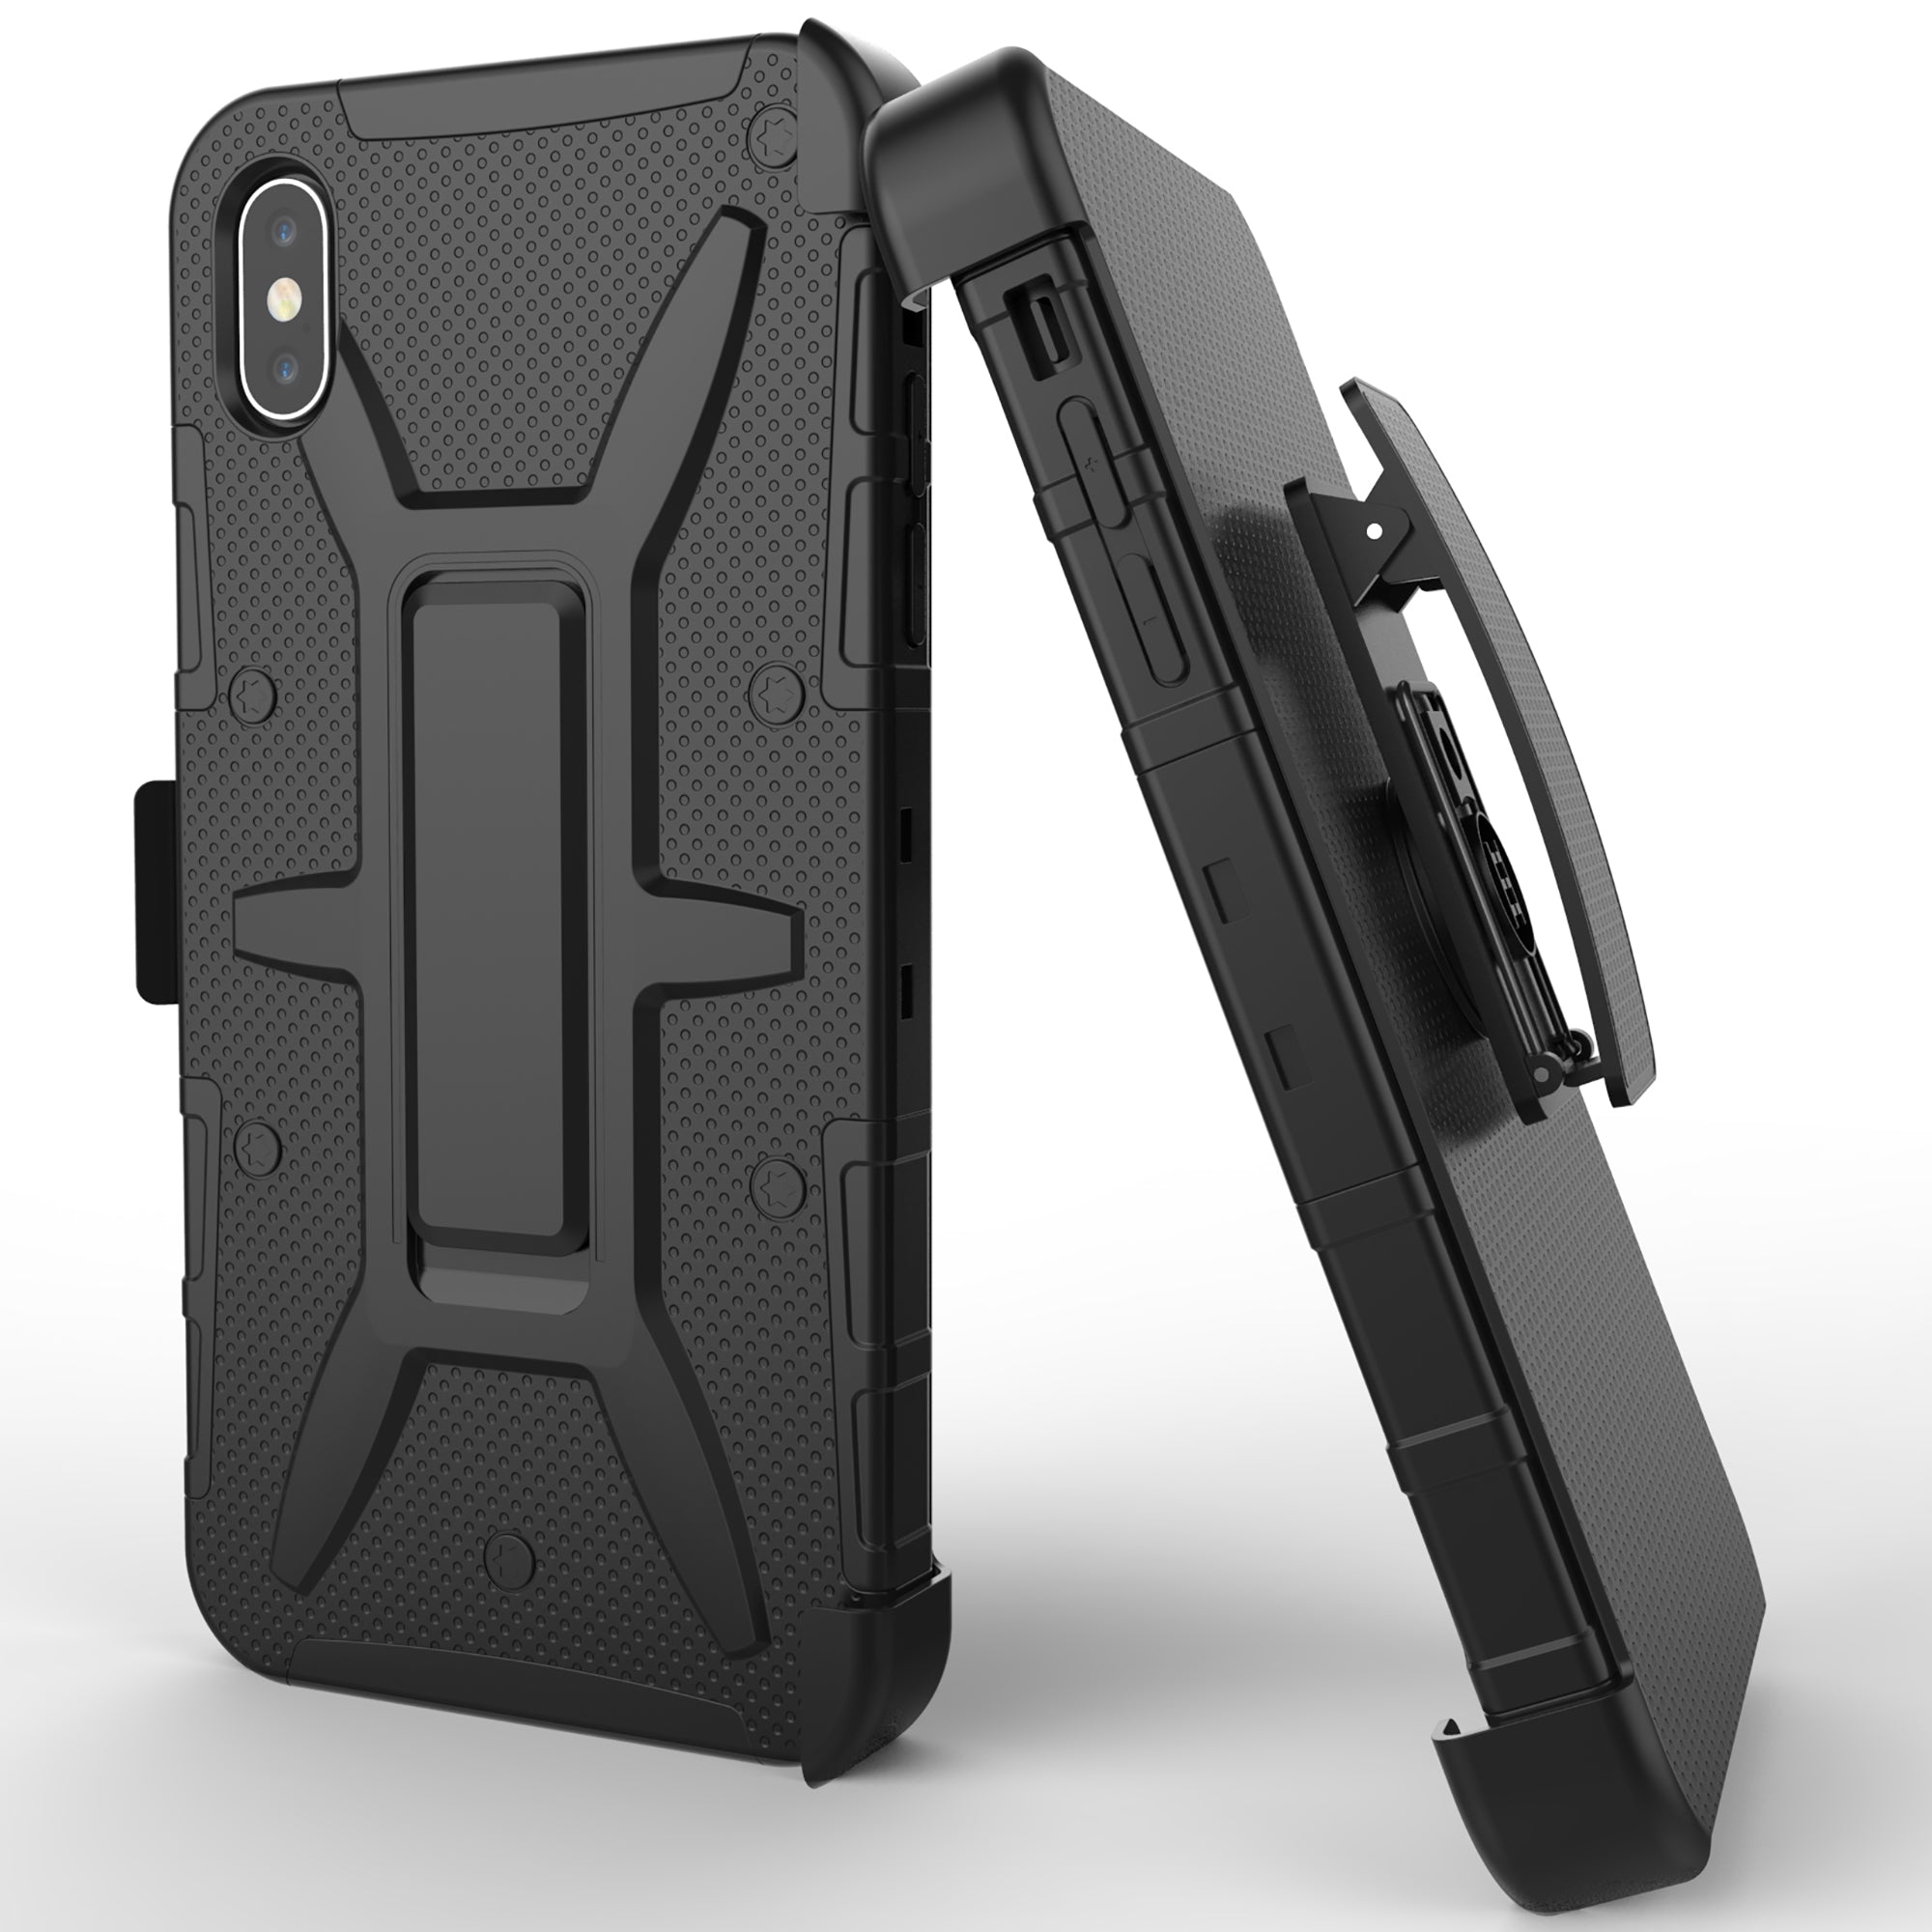 Luvvitt NCY iPhone XR Armor Case With Belt Clip Holster and Kickstand 6.1 2018 Black